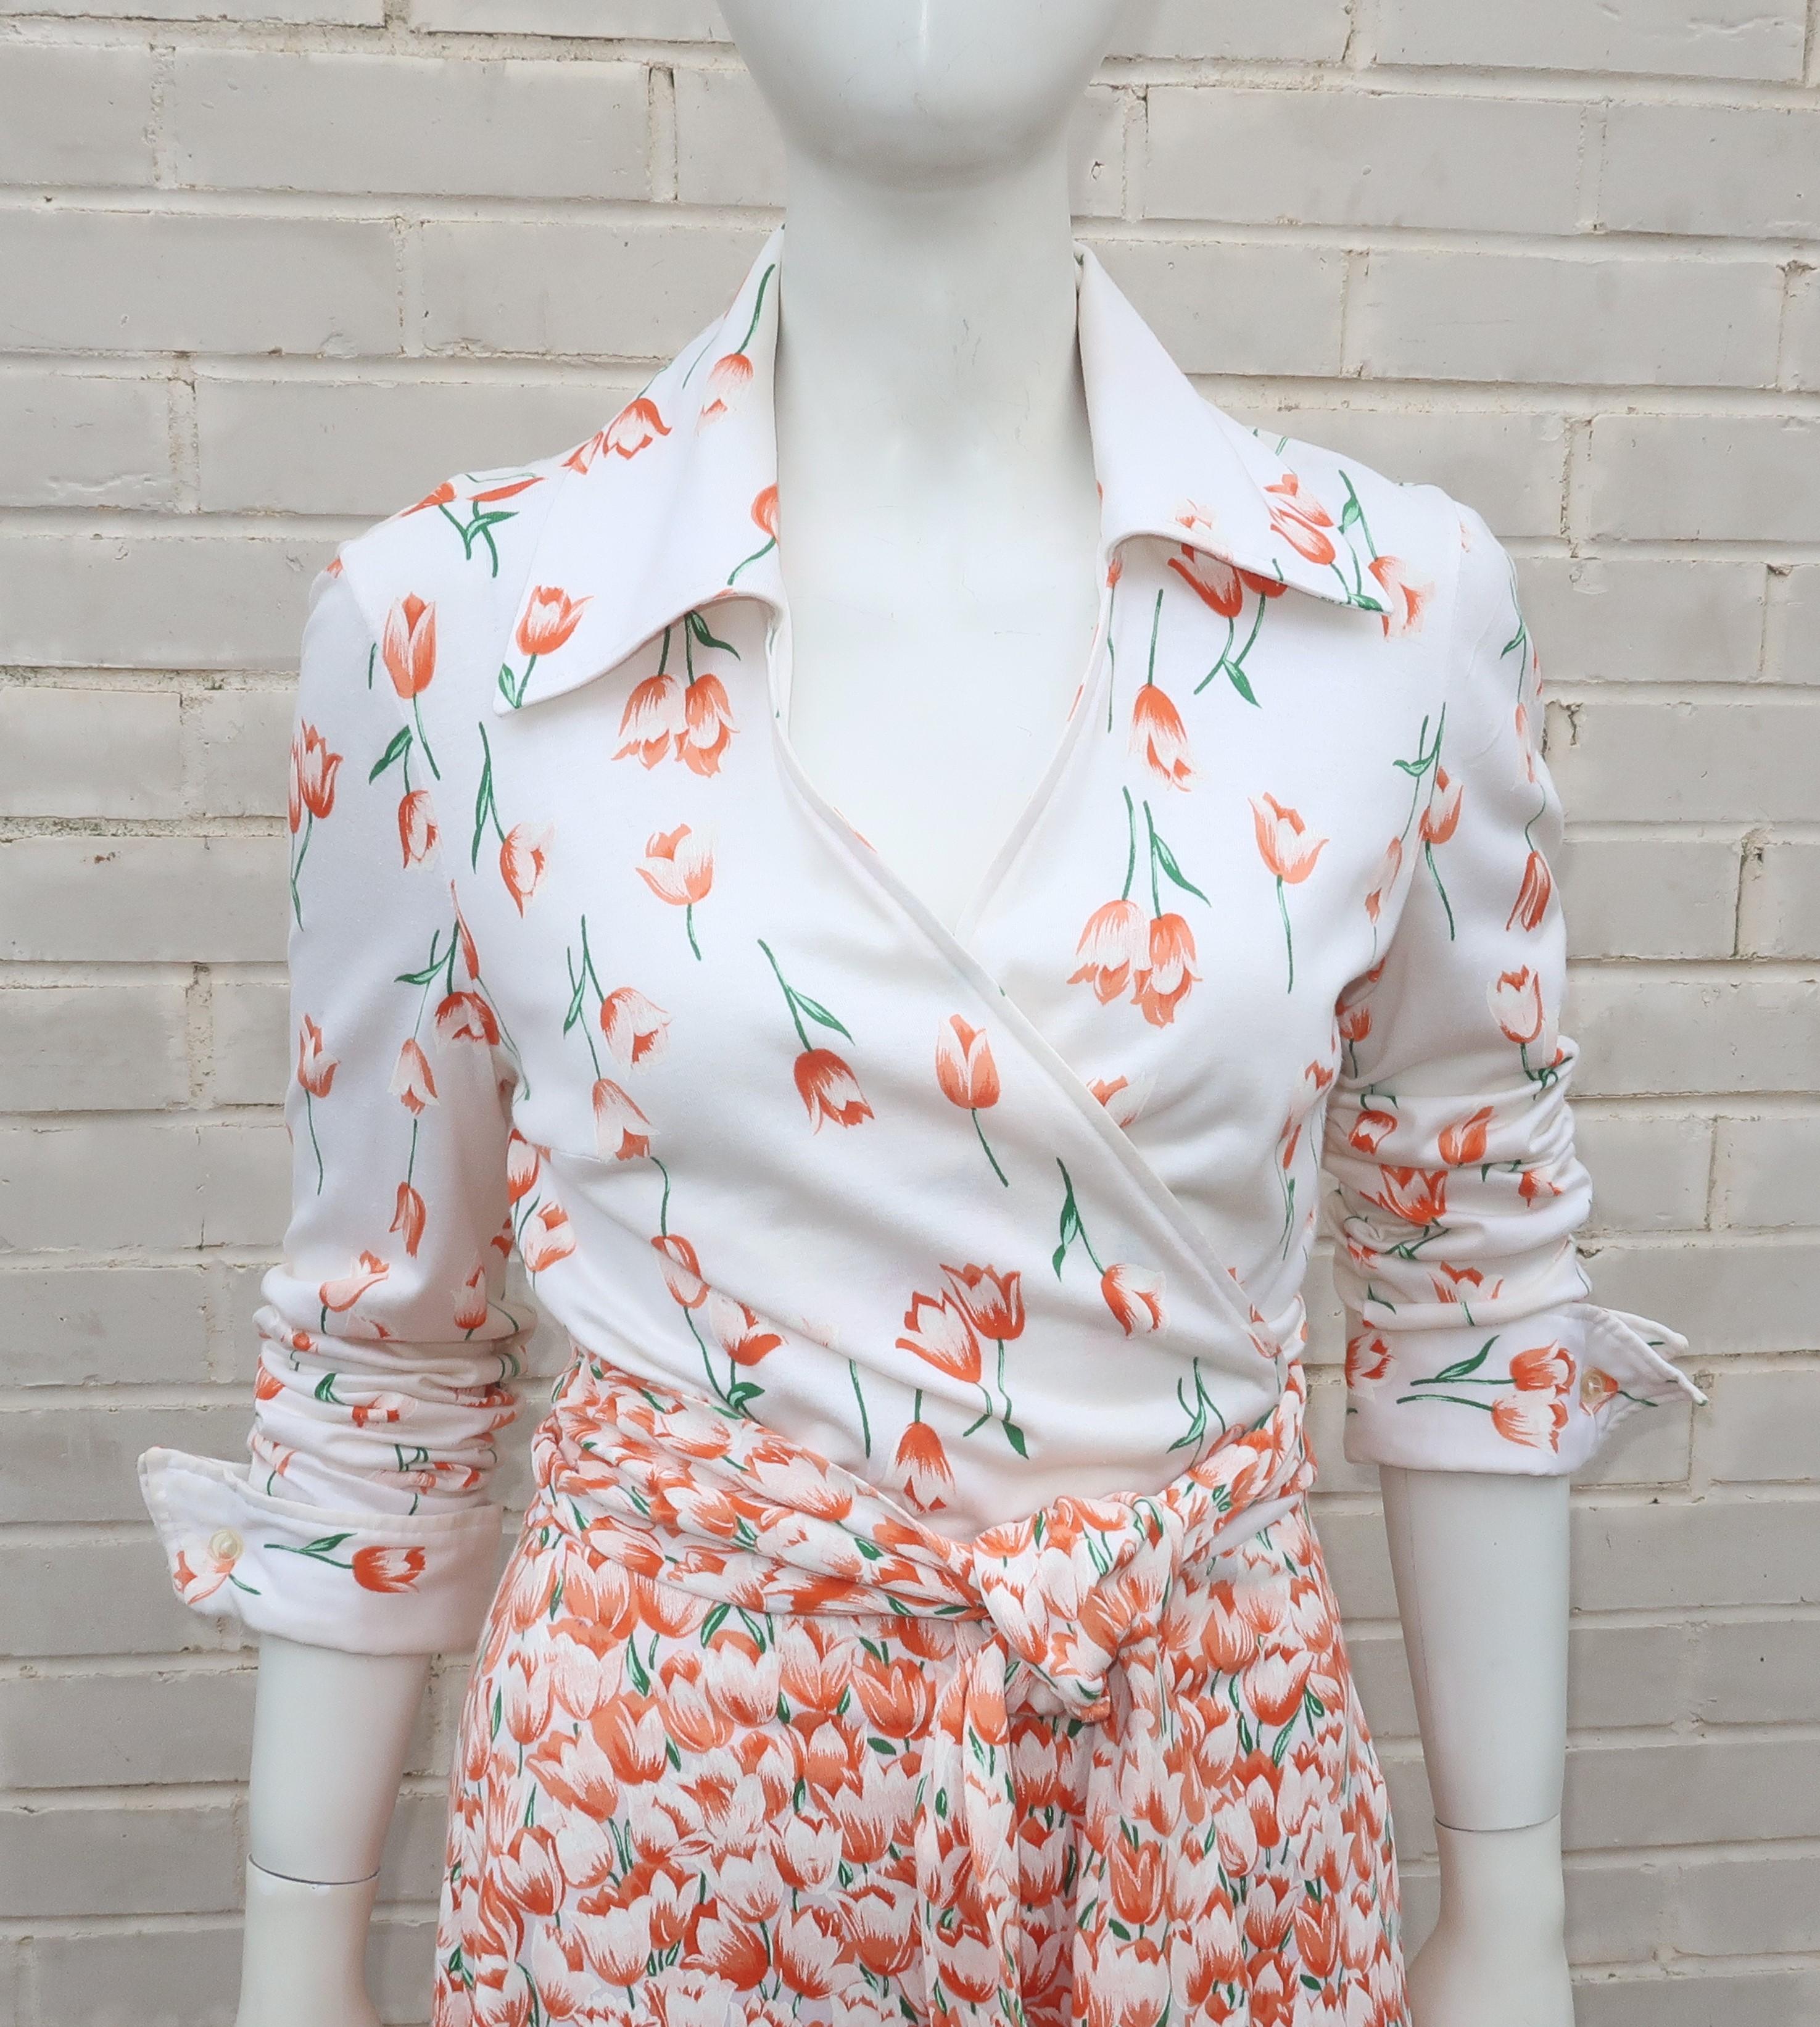 A classic 1970's Diane Von Furstenberg’s wrap dress in a cotton blend natural white knit fabric with an orange and green tulip print design.  The stylish wrap silhouette provides for a sexy plunging neckline framed by a pointy collar, finished